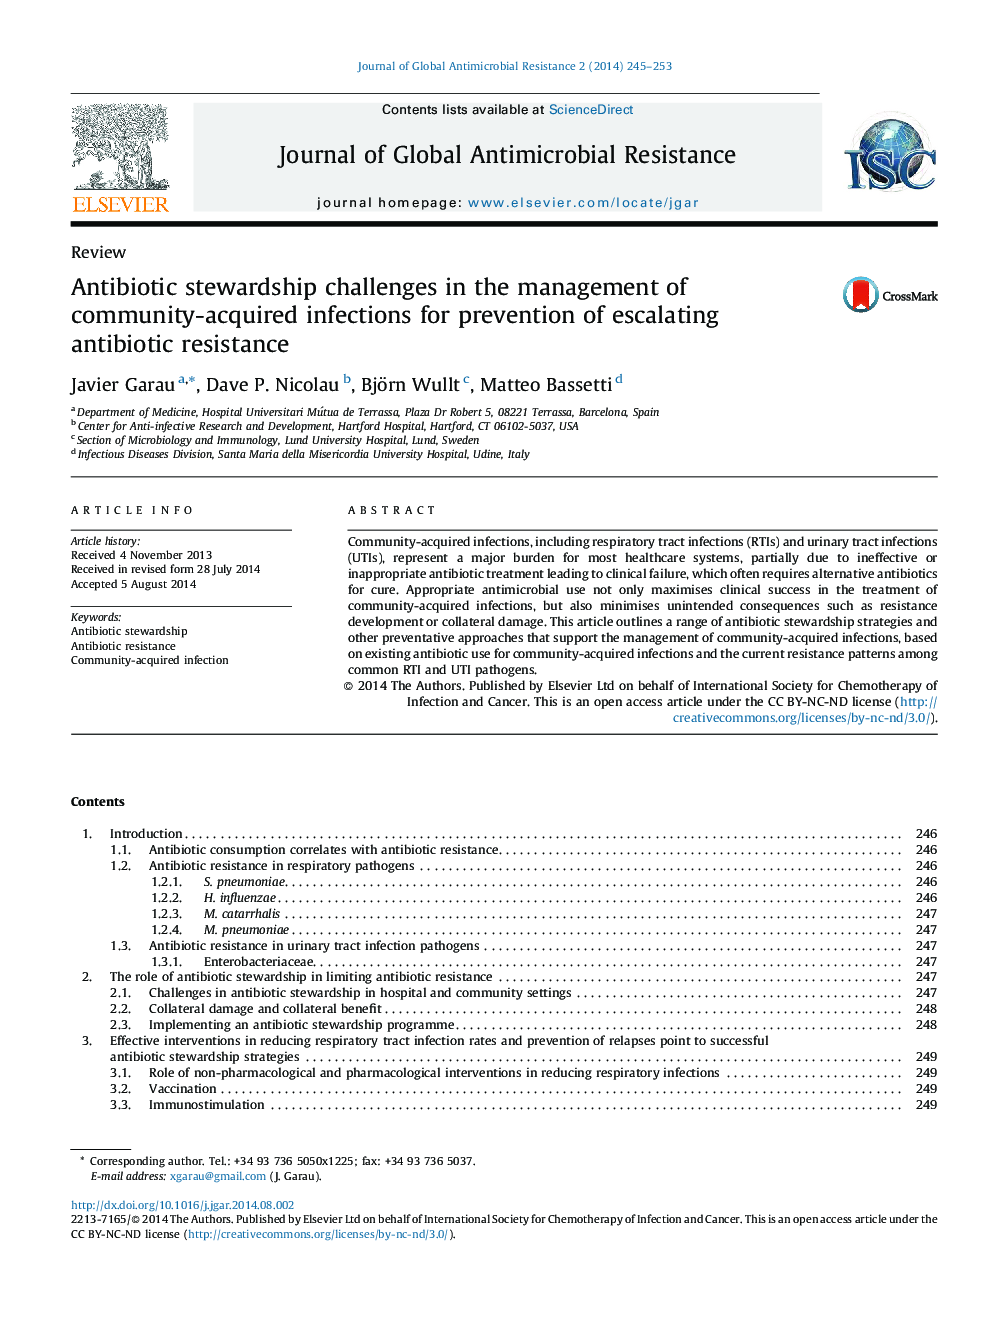 Antibiotic stewardship challenges in the management of community-acquired infections for prevention of escalating antibiotic resistance